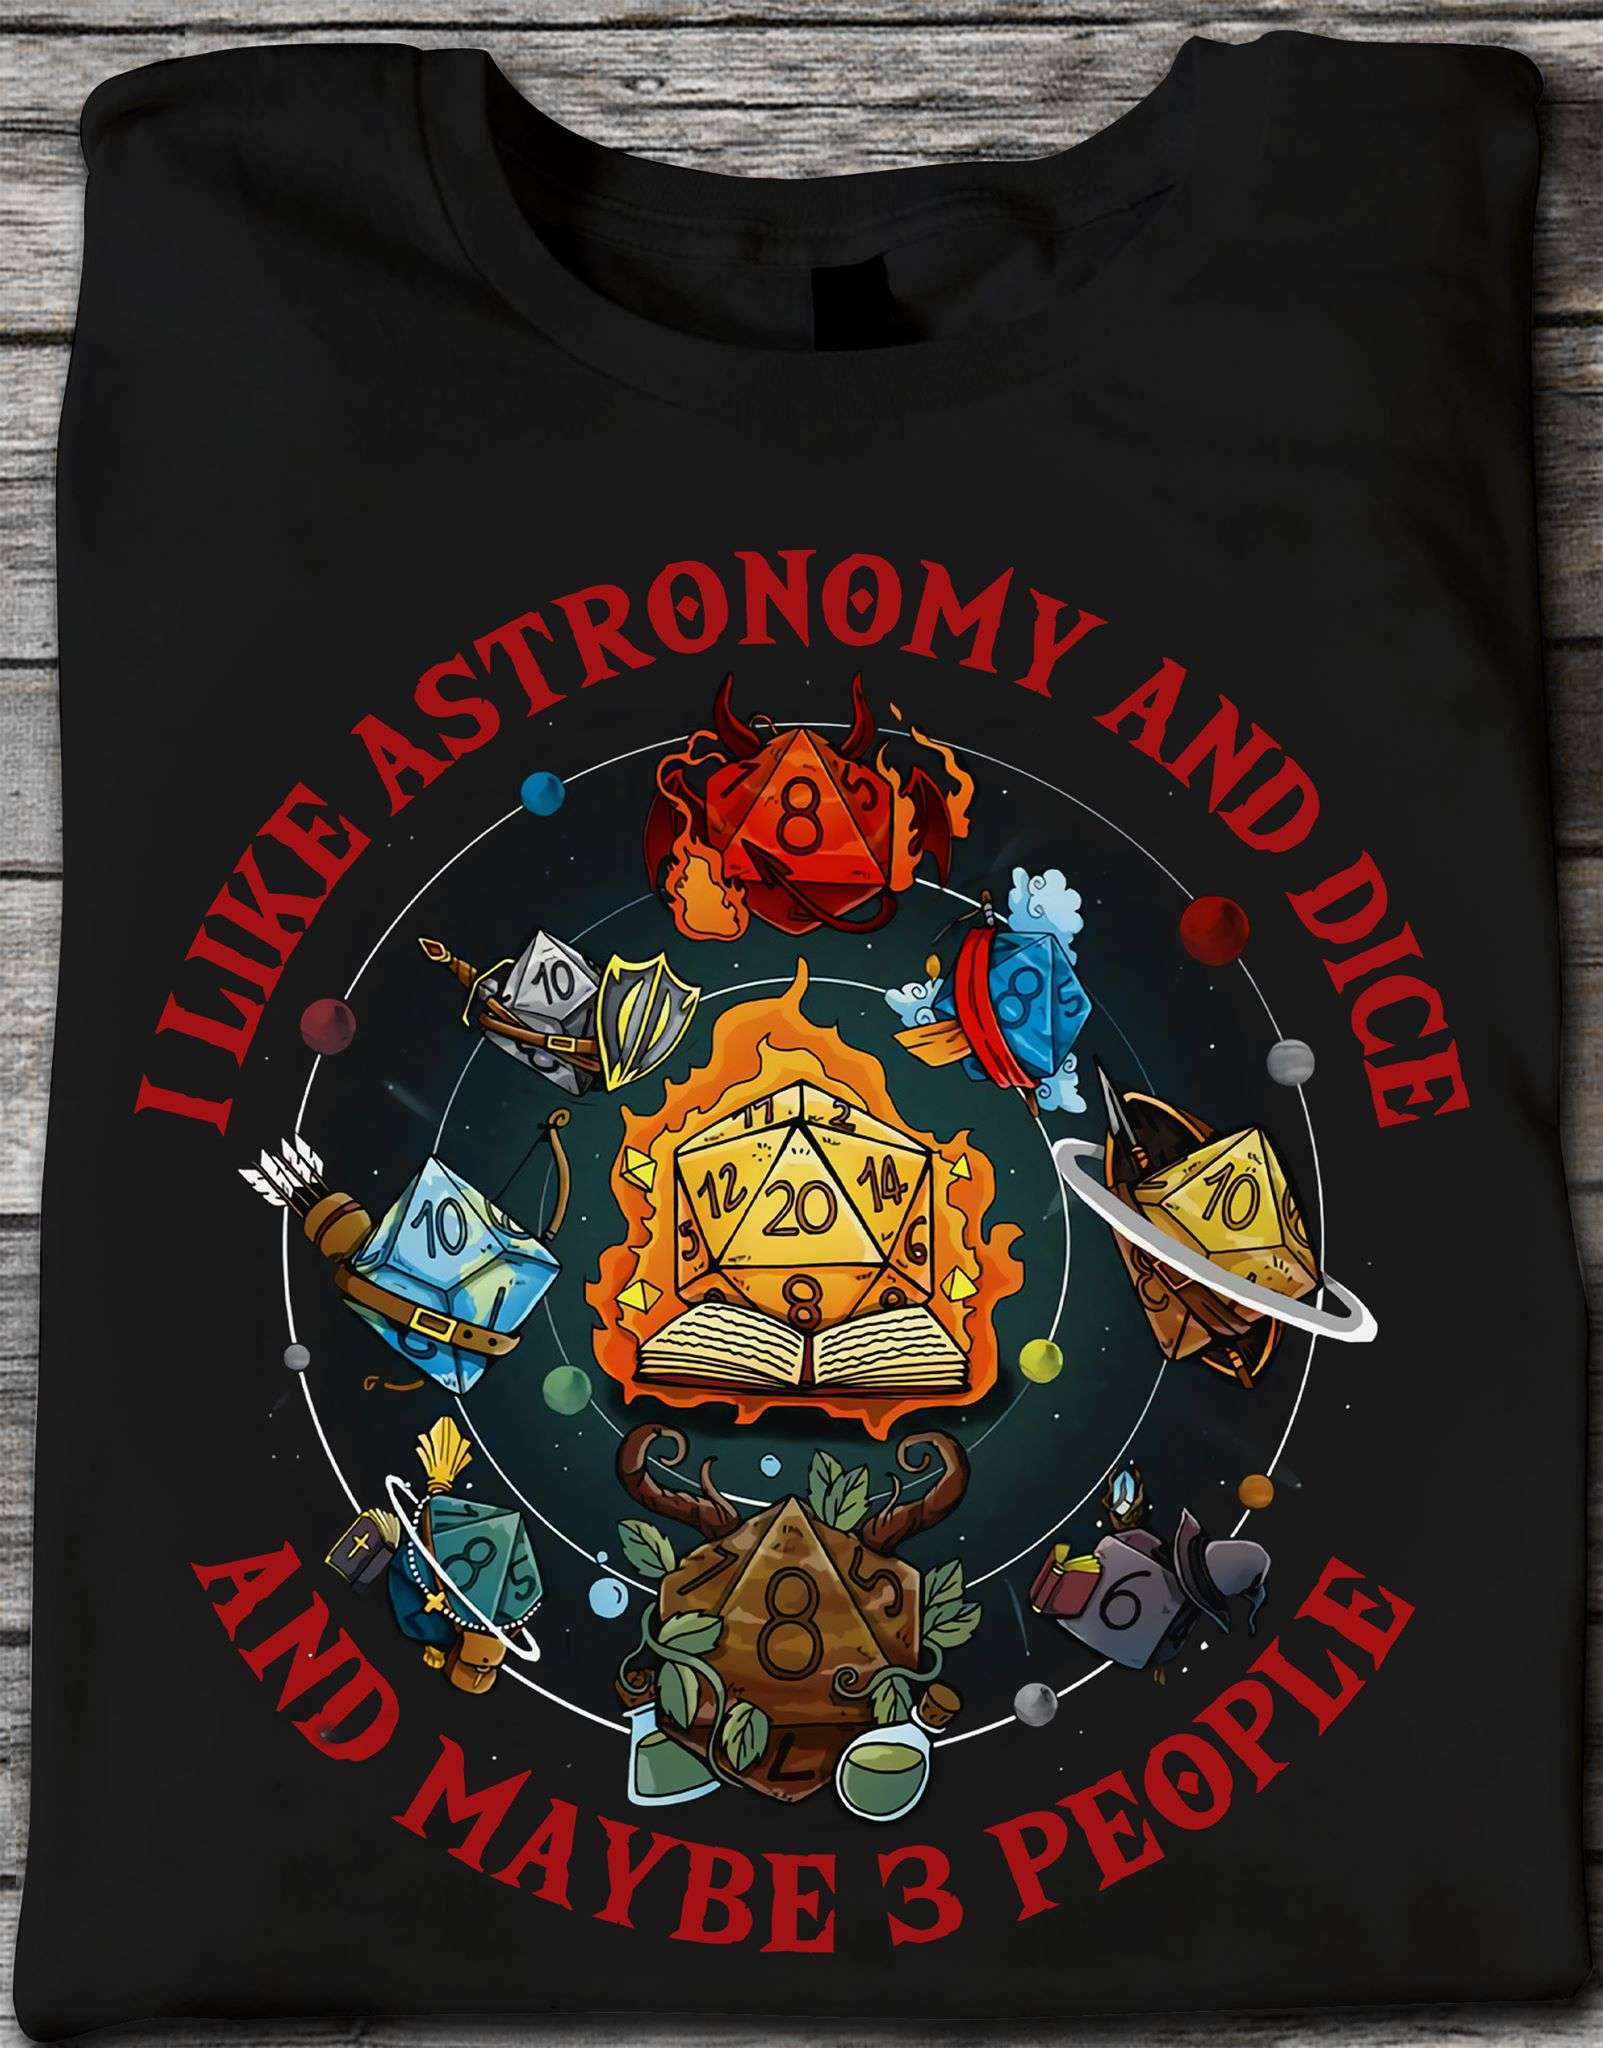 I like astronomy and dice and maybe 3 people - Dungeons and Dragons, rolling initiative